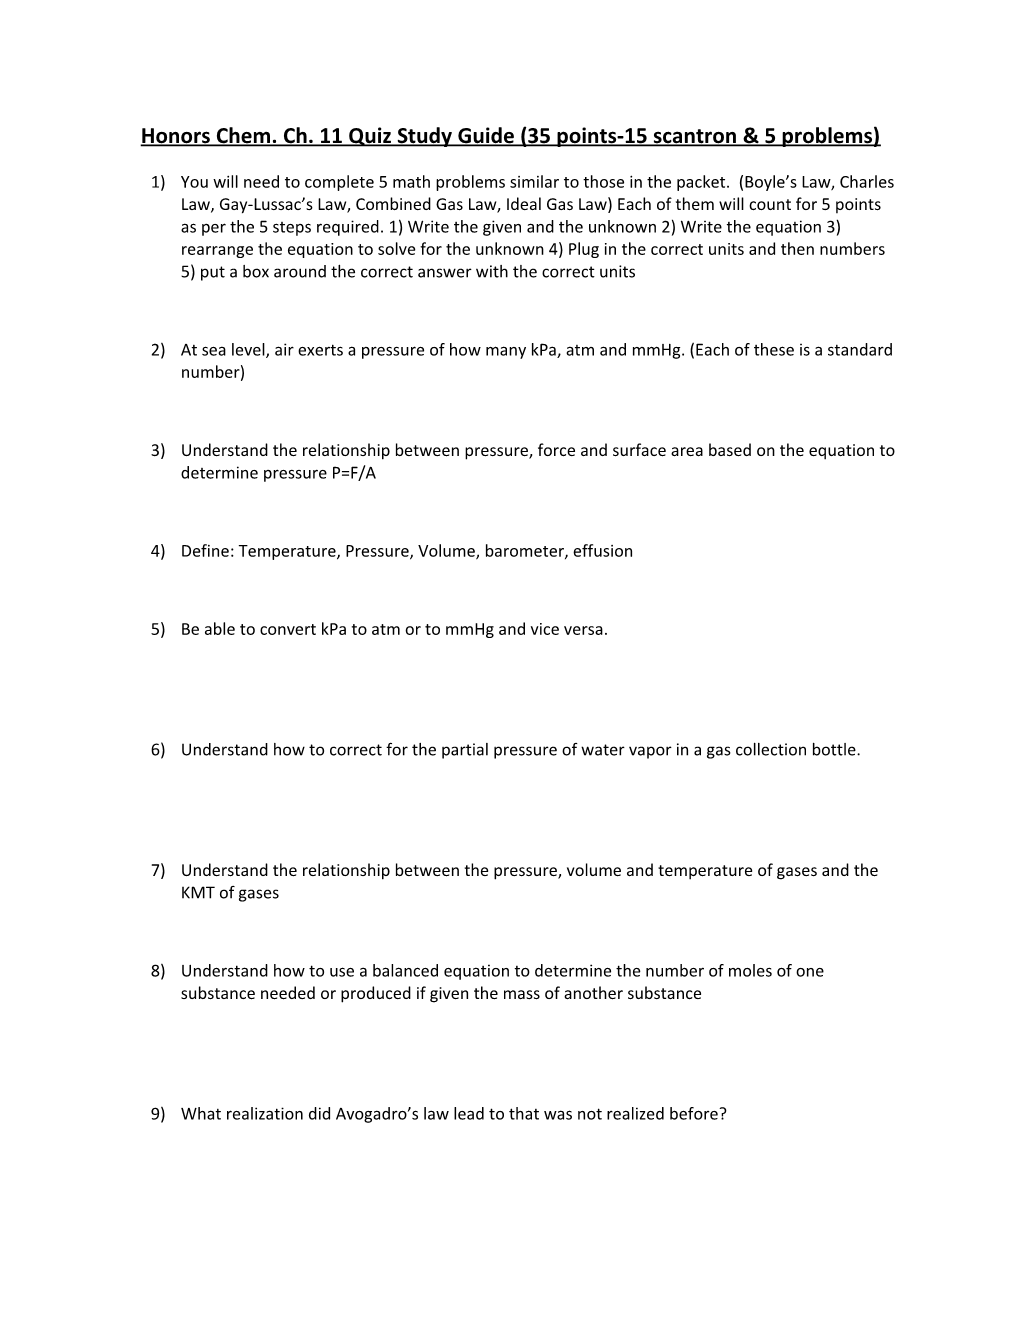 Honors Chem. Ch. 11 Quiz Study Guide (35 Points-15 Scantron & 5 Problems )